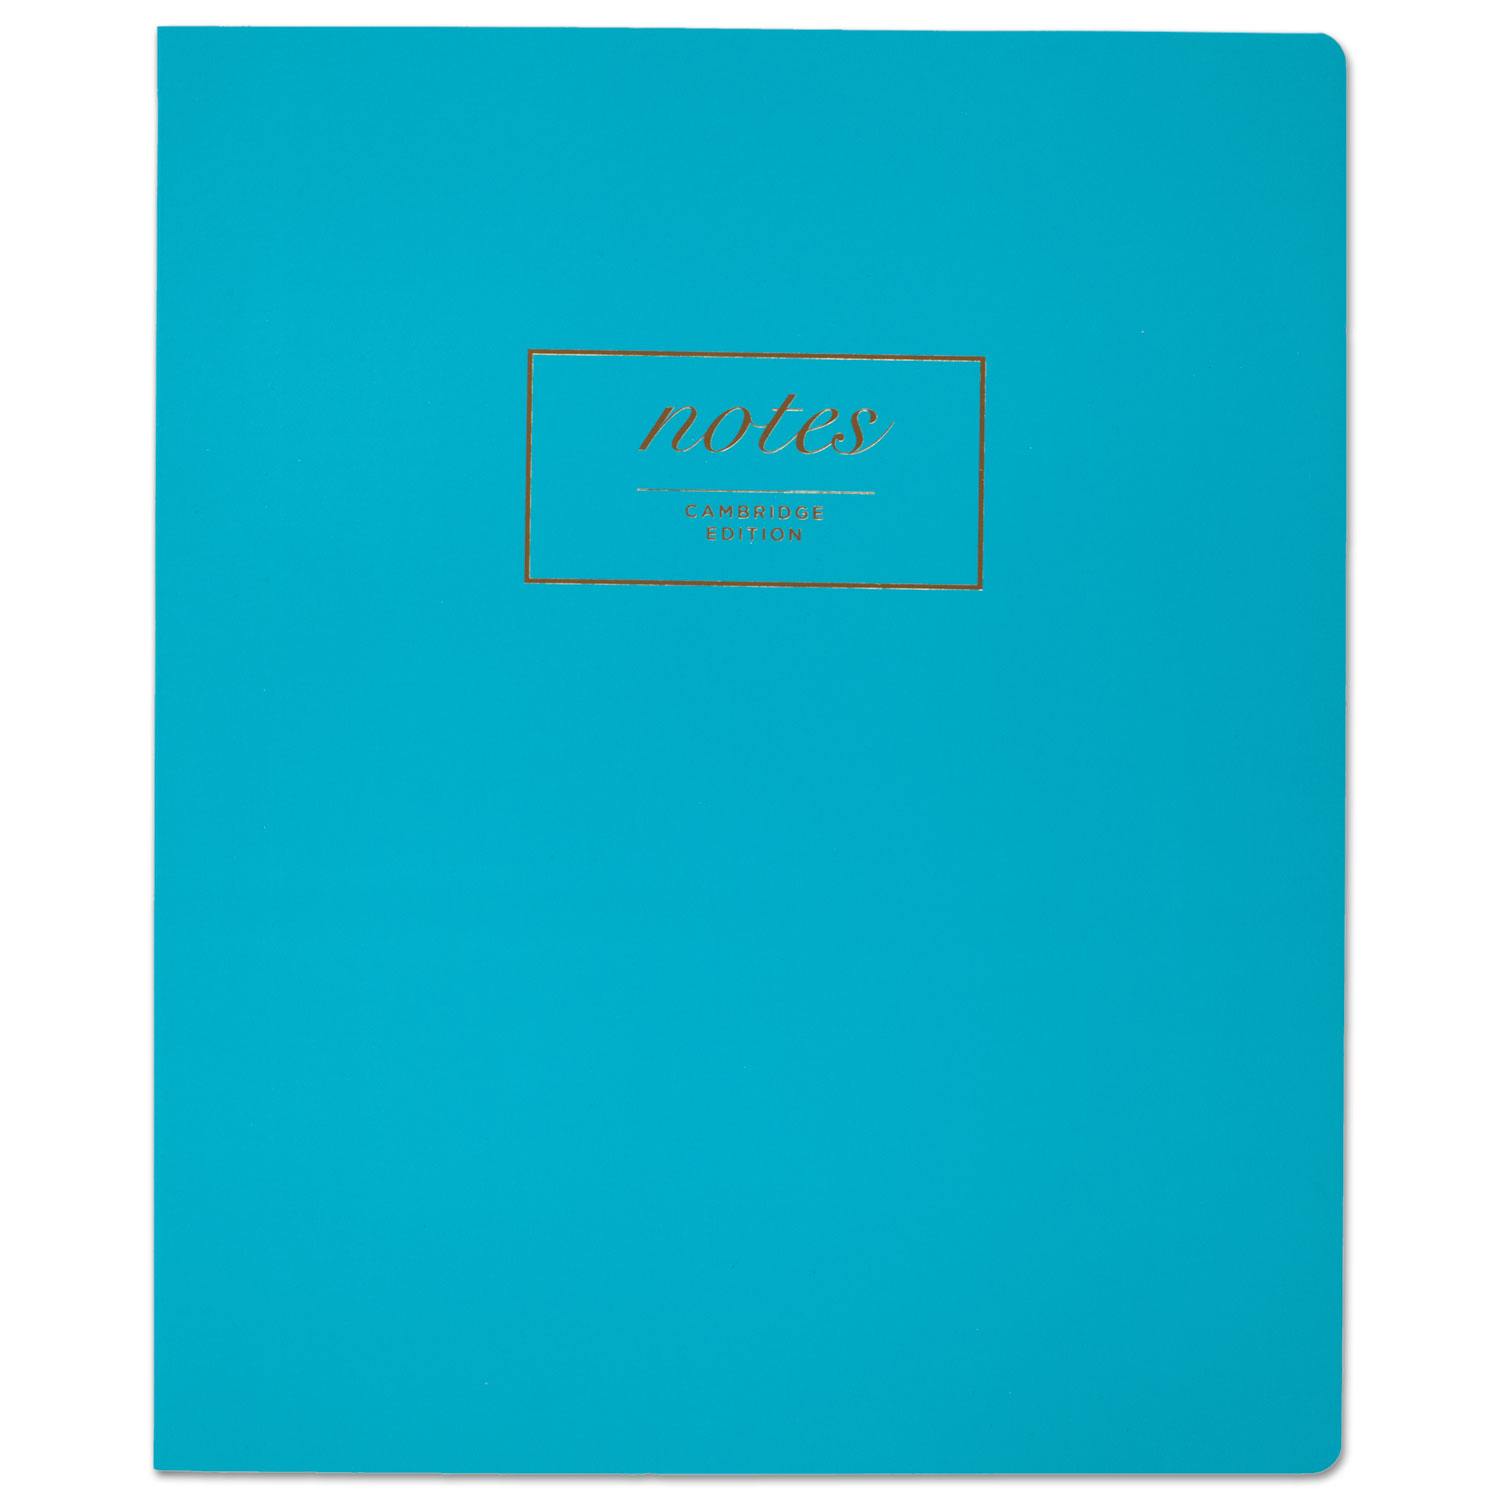  Cambridge 49550 Jewel Tone Notebook, Wide/Legal Rule, Teal Cover, 11 x 9, 80 Sheets (MEA49550) 